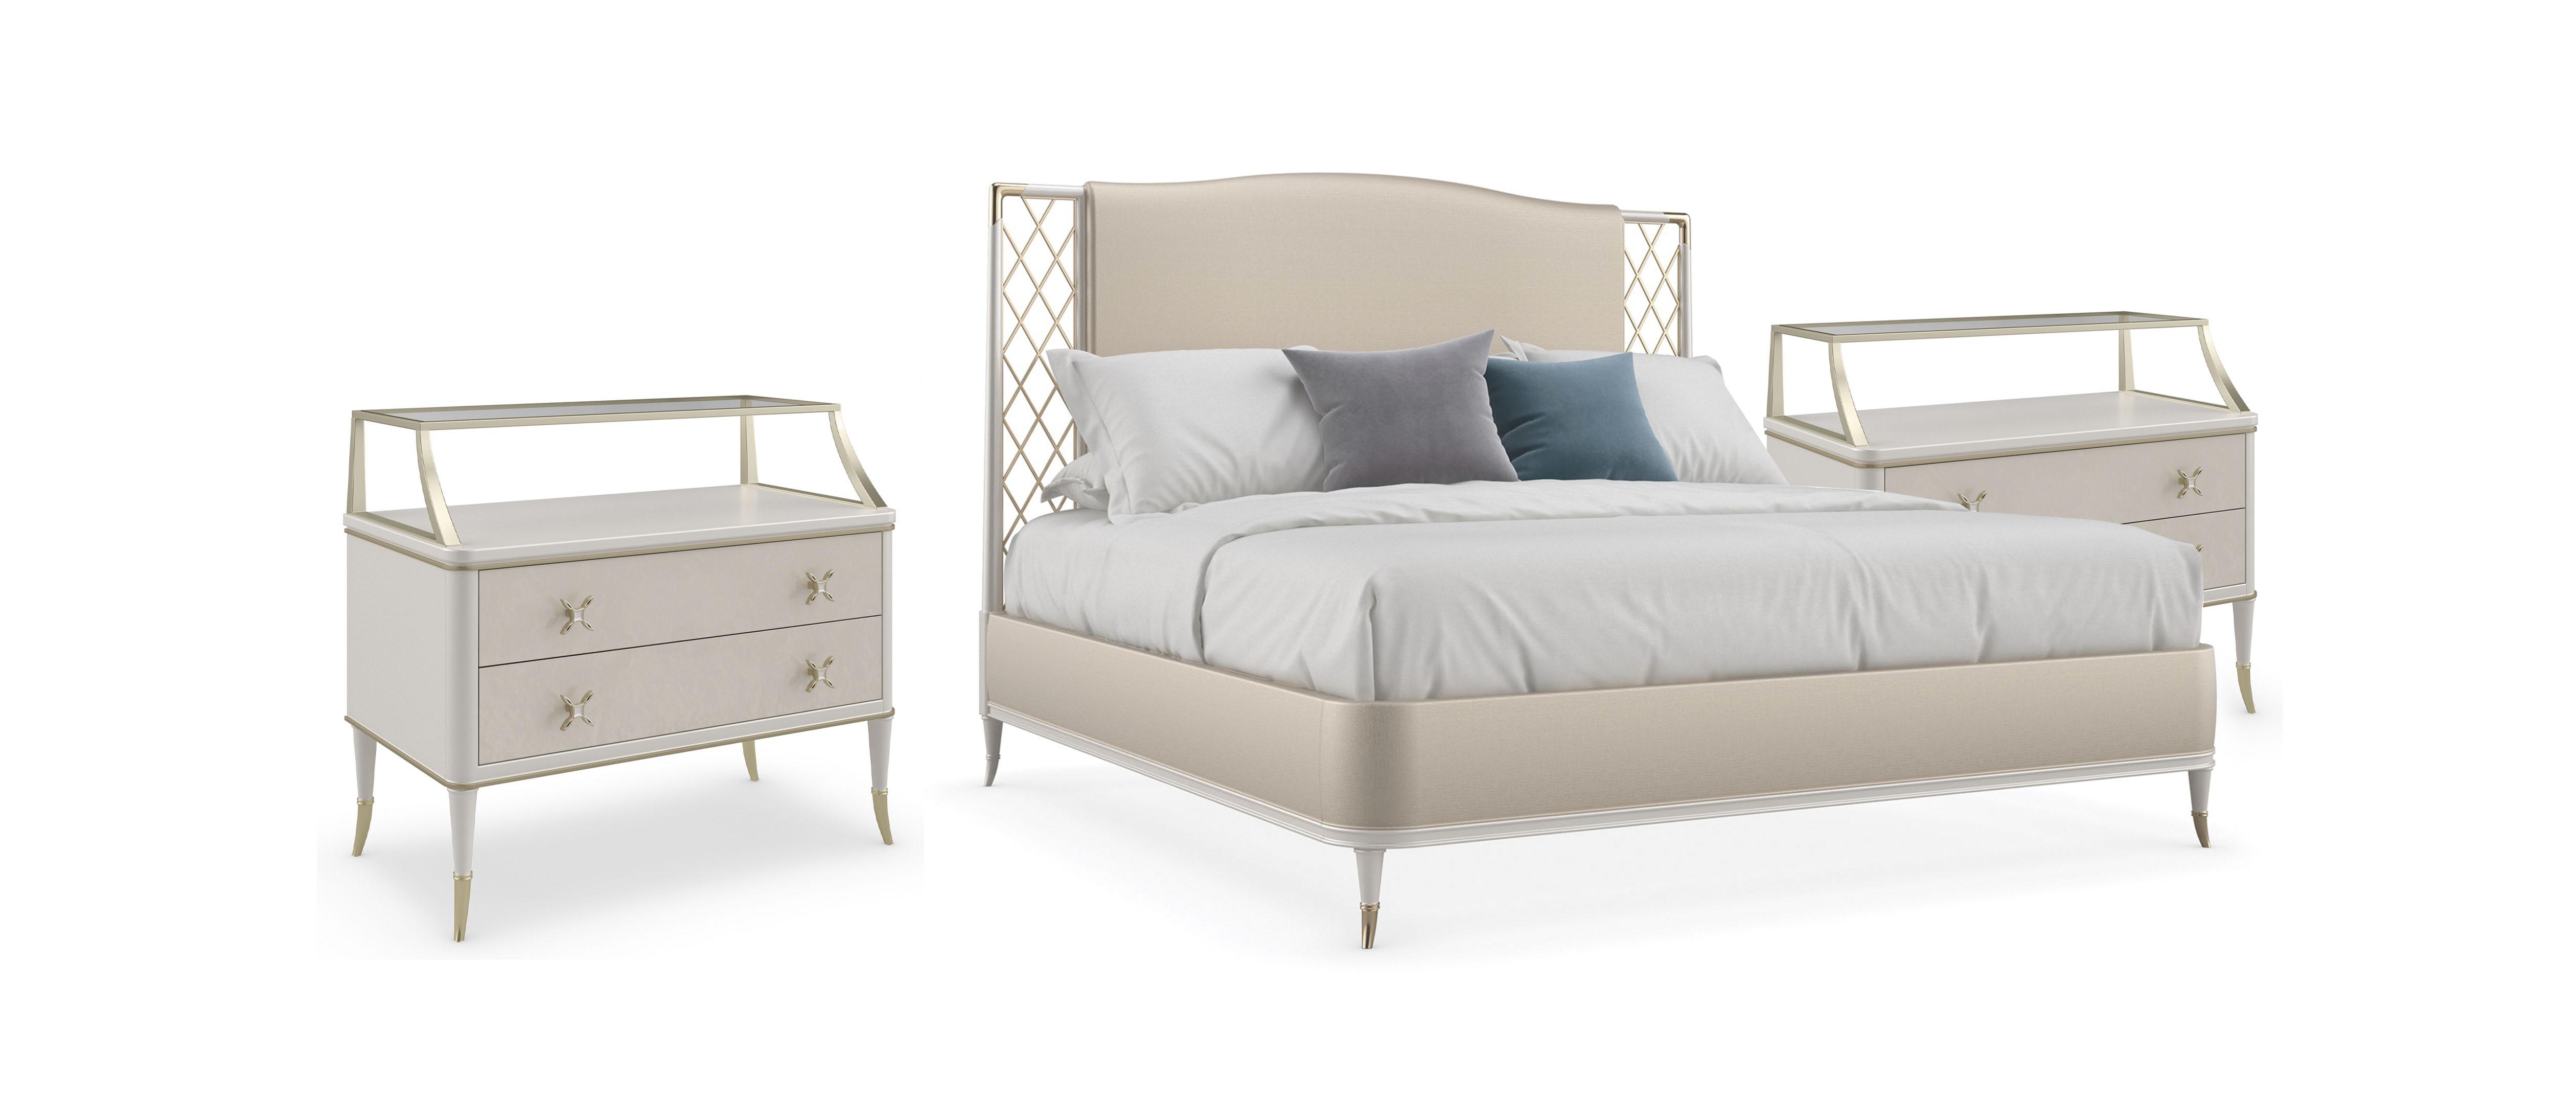 Contemporary Platform Bedroom Set STAR OF THE NIGHT-KING / ALL DOLLED UP CLA-021-121-2N-3PC in Cream, Gold Velvet